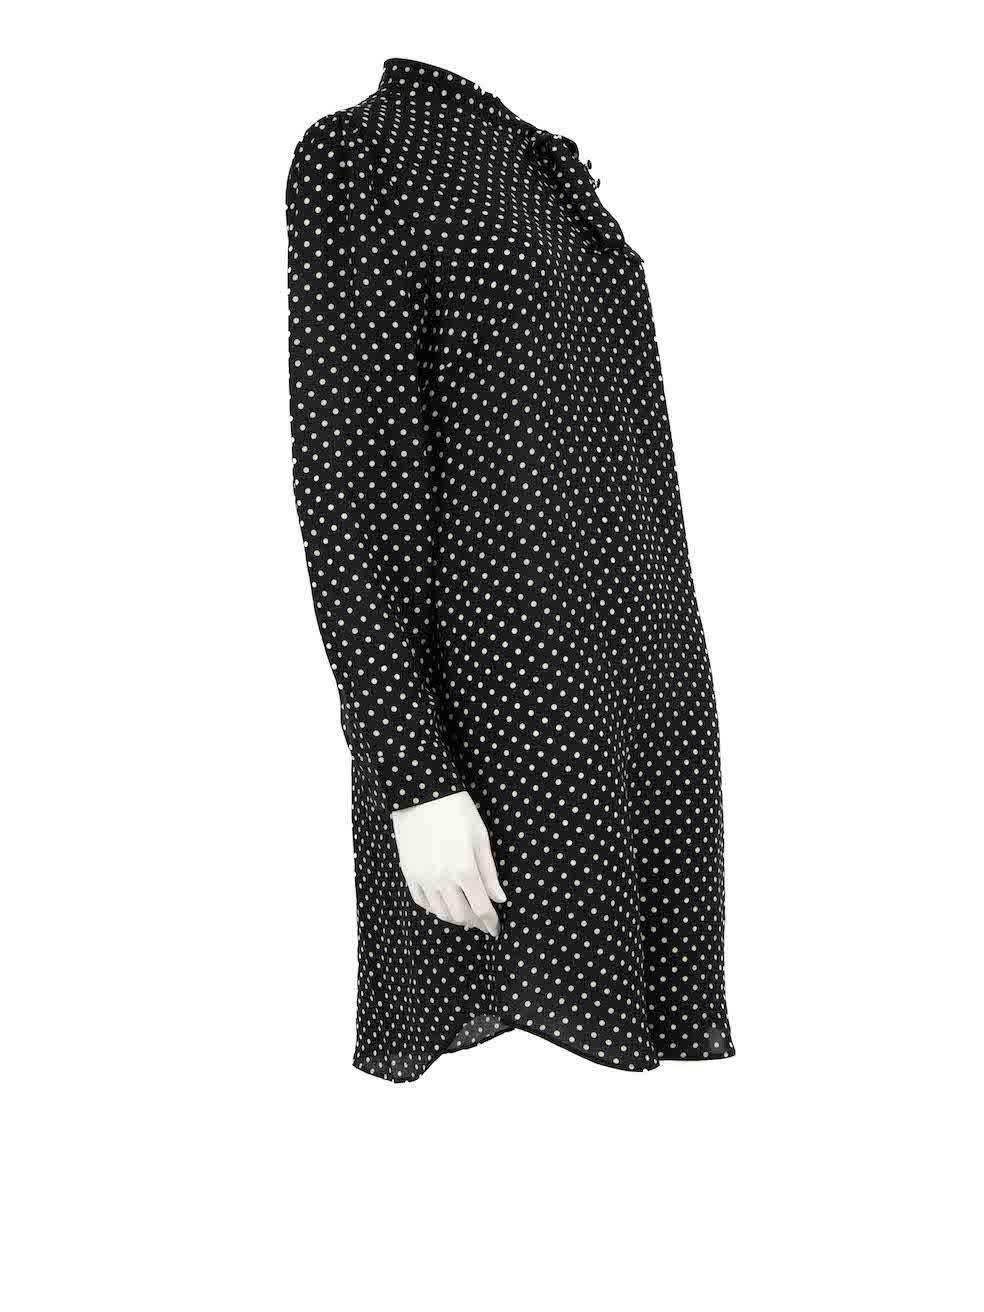 CONDITION is Very good. Hardly any visible wear to dress is evident on this used Red Valentino designer resale item.
 
 
 
 Details
 
 
 Black
 
 Silk
 
 Dress
 
 Polkadot pattern
 
 Round neck
 
 Long sleeves
 
 Knee length
 
 Back zip fastening
 
